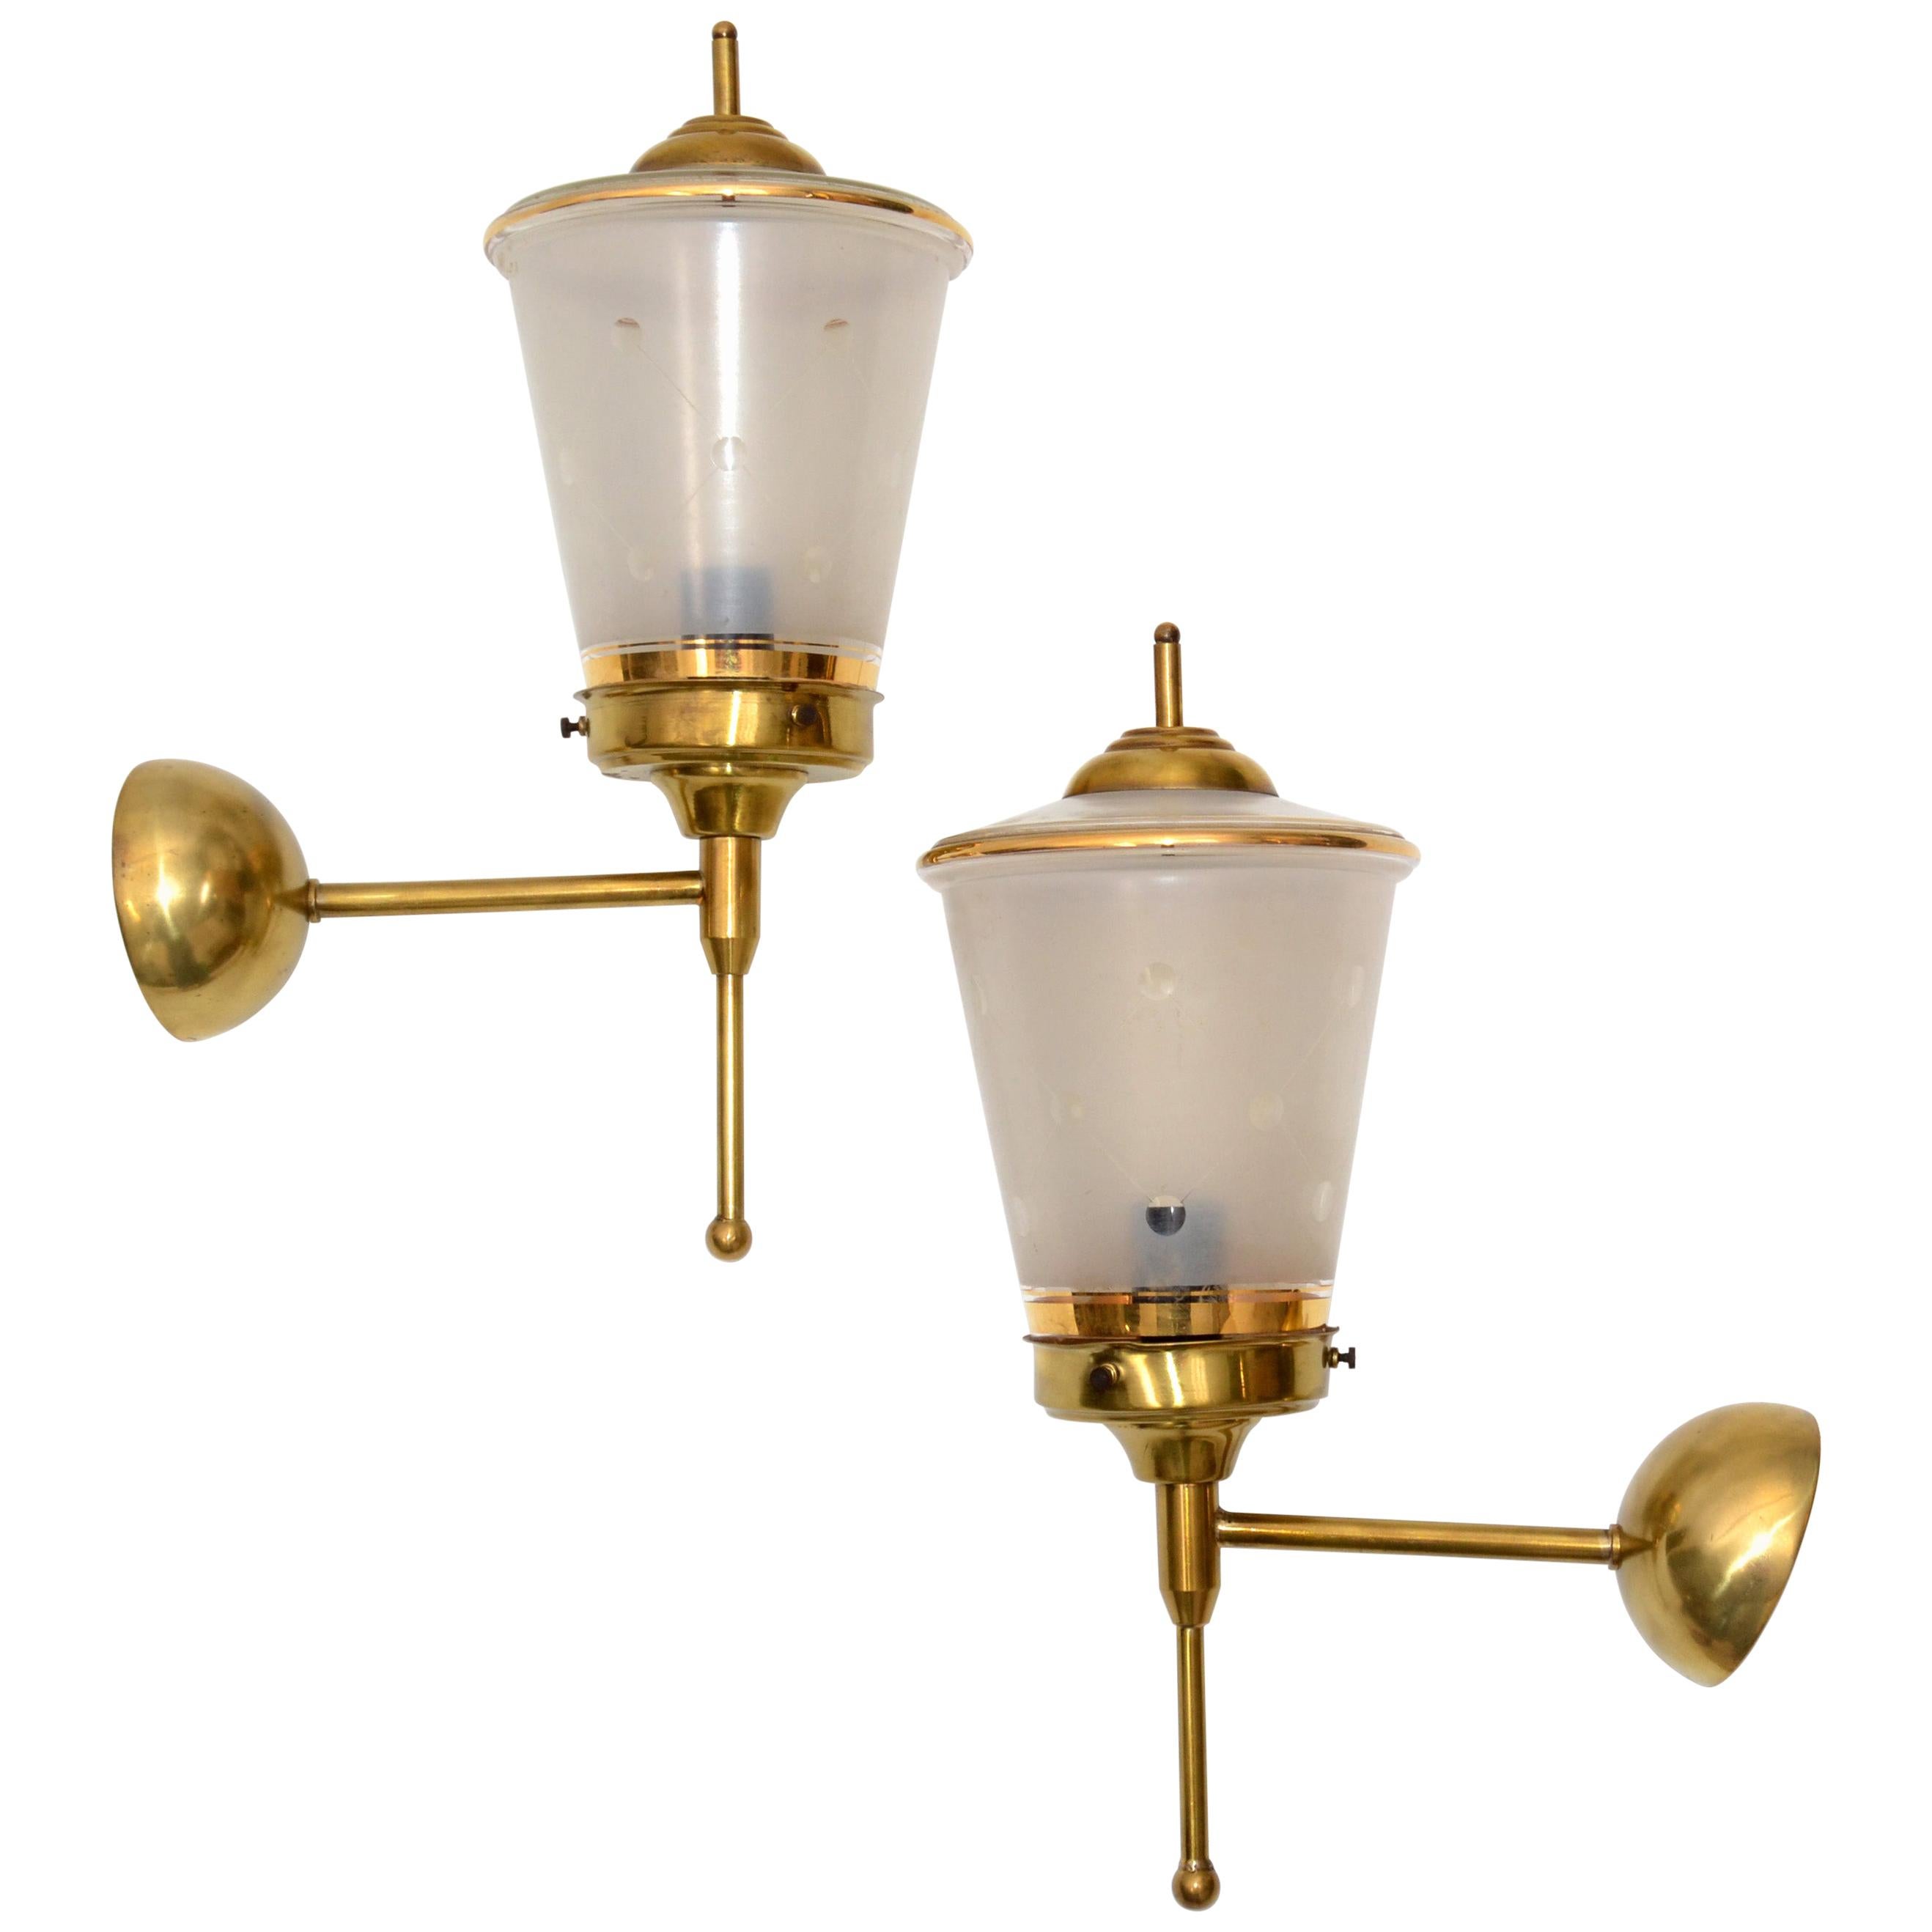 Maison Lunel Pair of Ornate Glass and Brass Lantern Wall Mounted Sconces, France